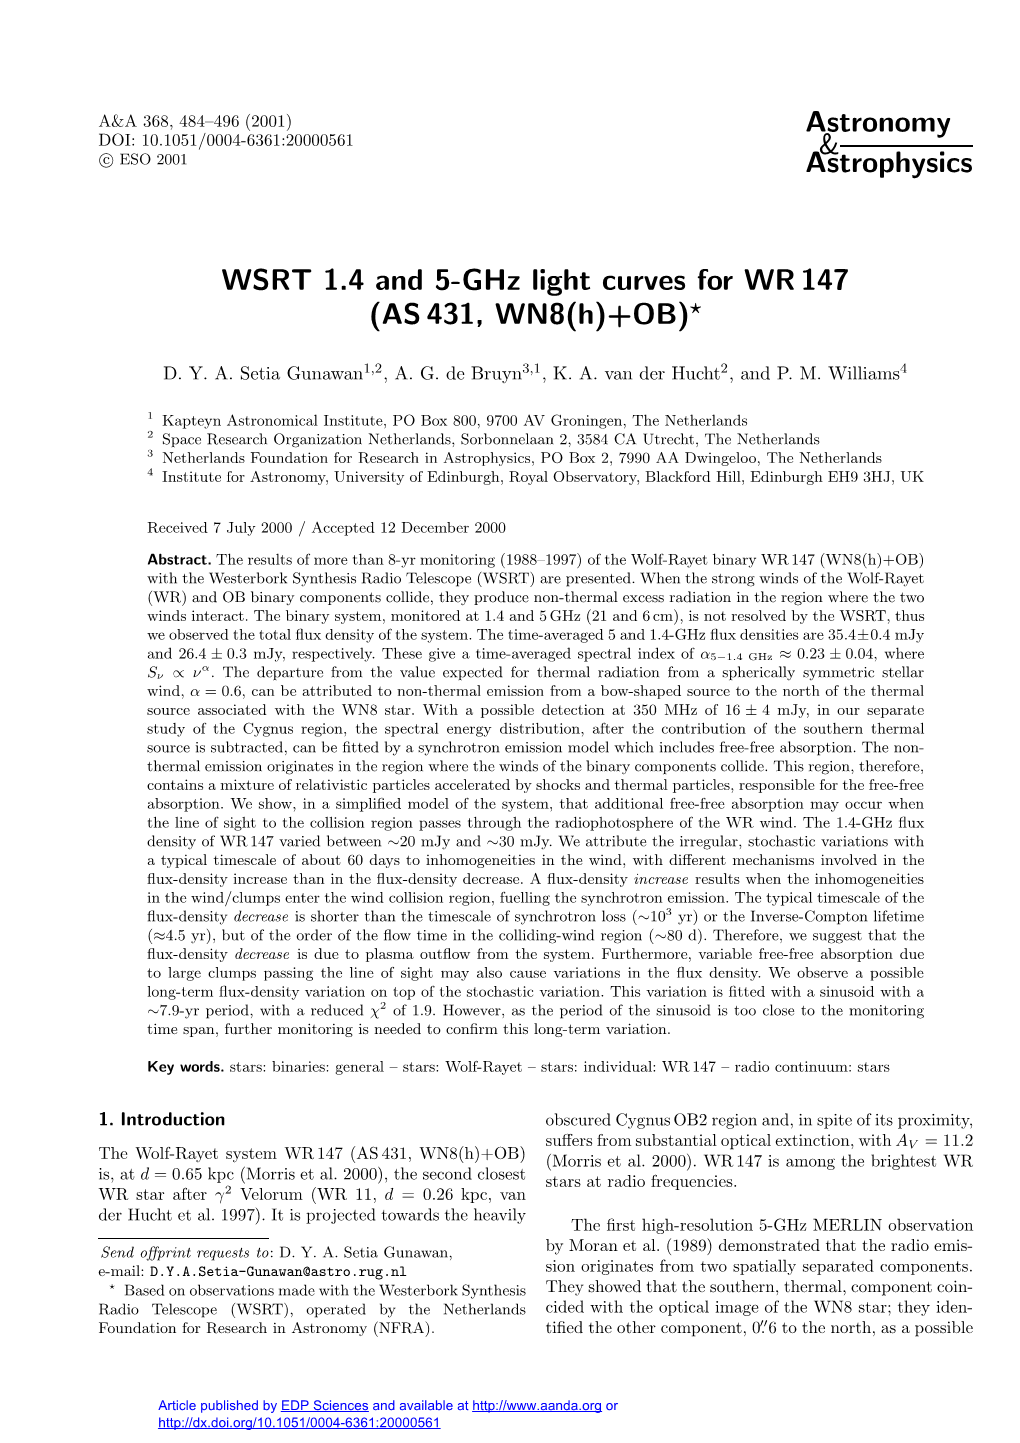 WSRT 1.4 and 5-Ghz Light Curves for WR 147 (AS 431, WN8(H)+OB)?